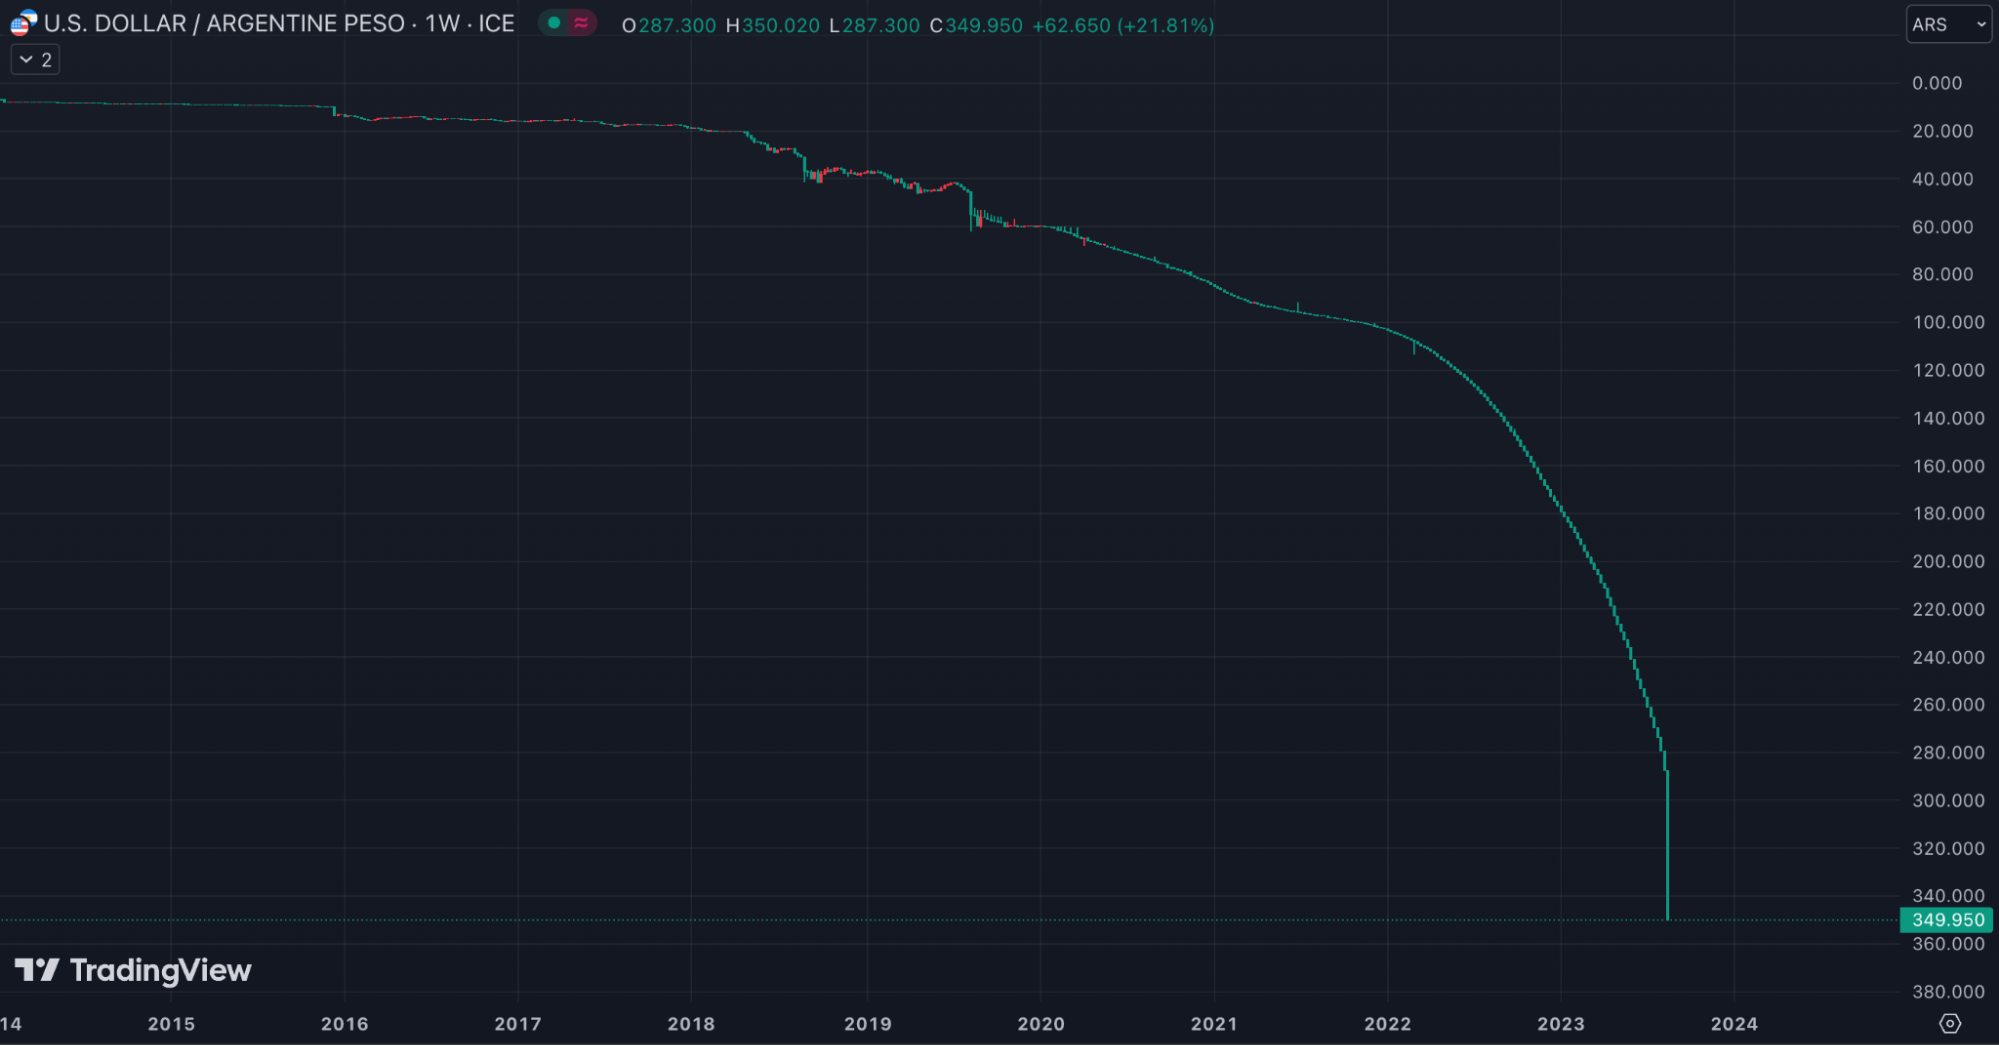 Fiat Currency Collapse (Argentine Peso) 